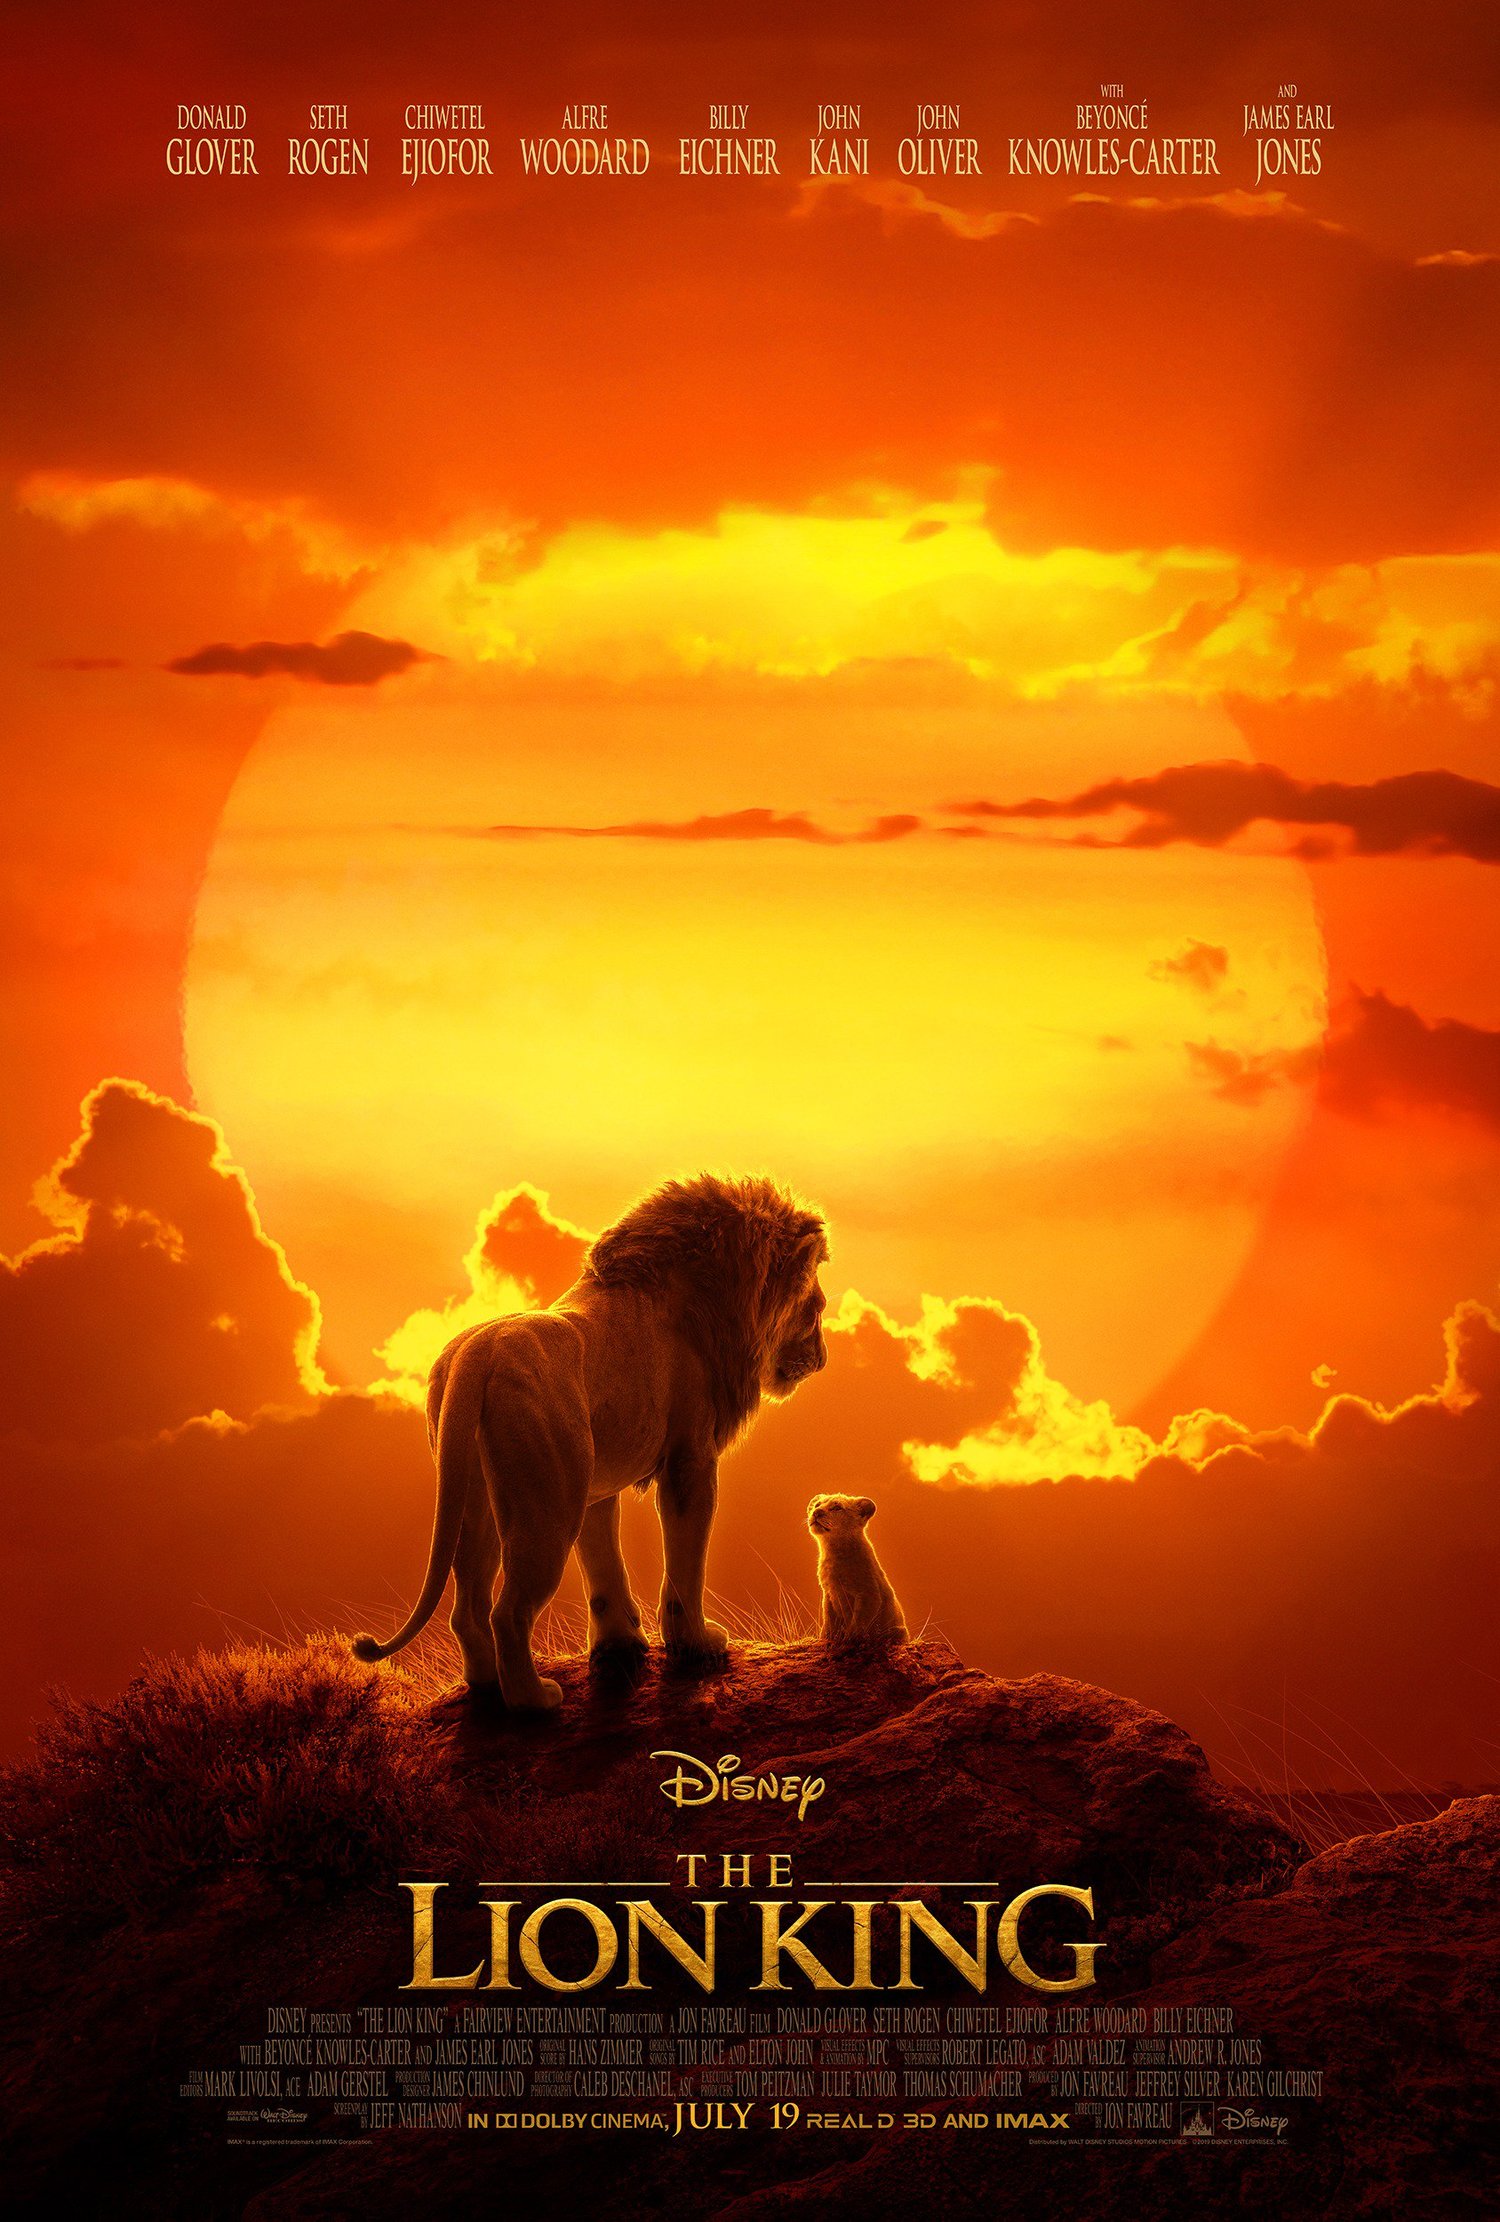 Jon Favreau's THE LION KING Gets a New Poster and TV Spot - Long Live The King1